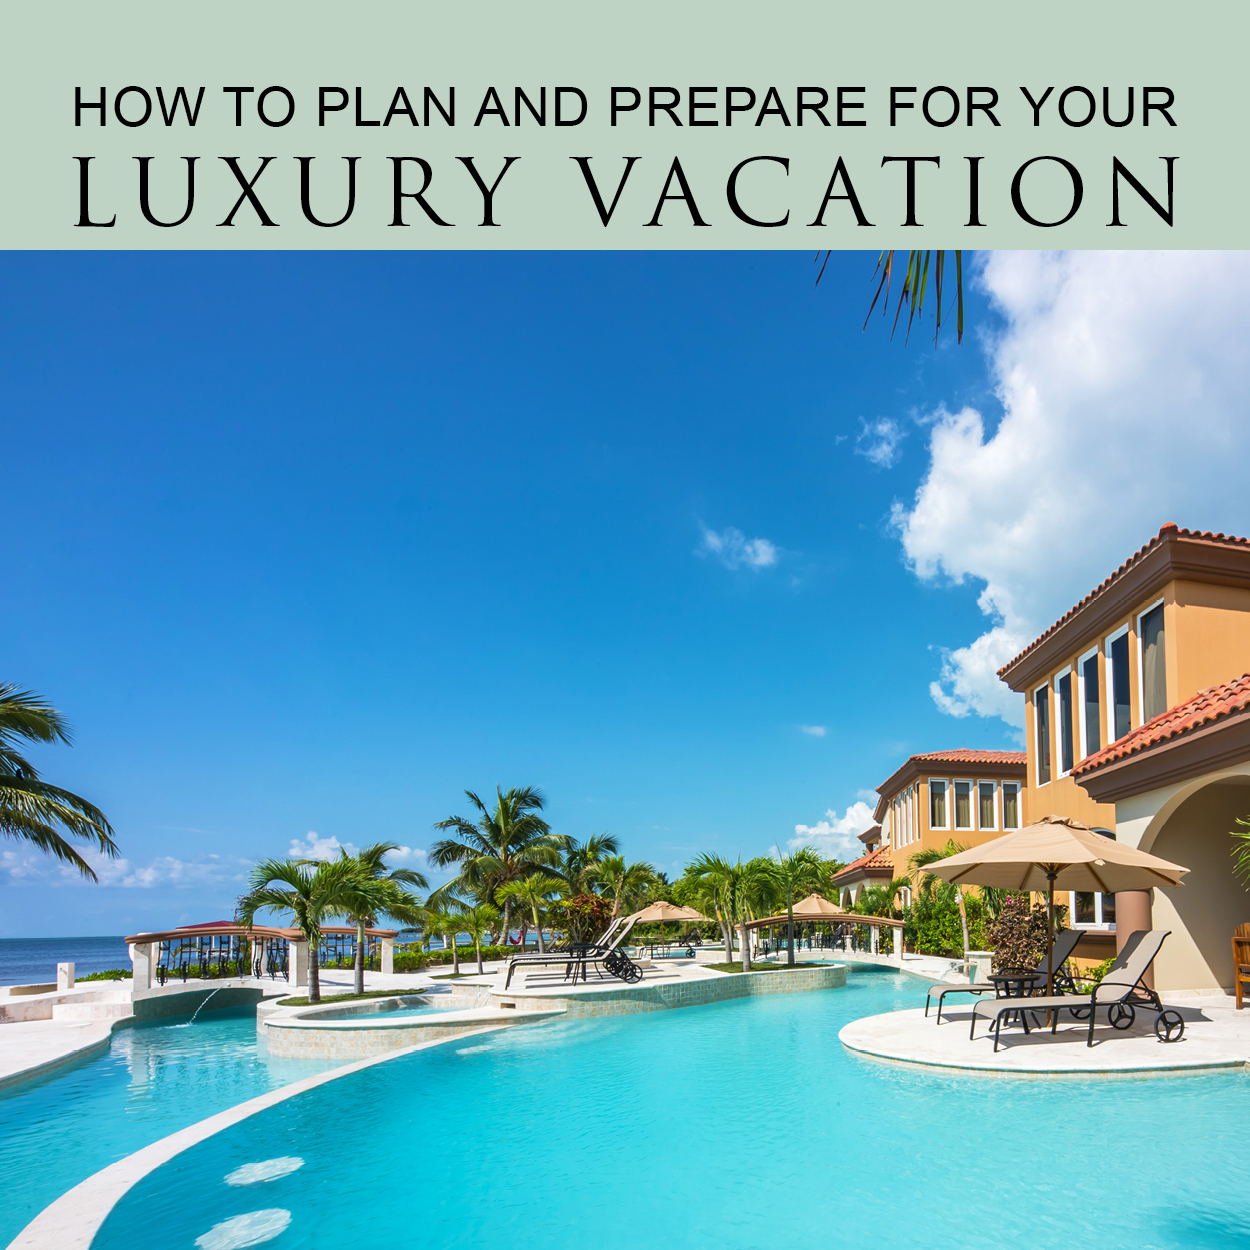 How to plan and prepare for your luxury vacation